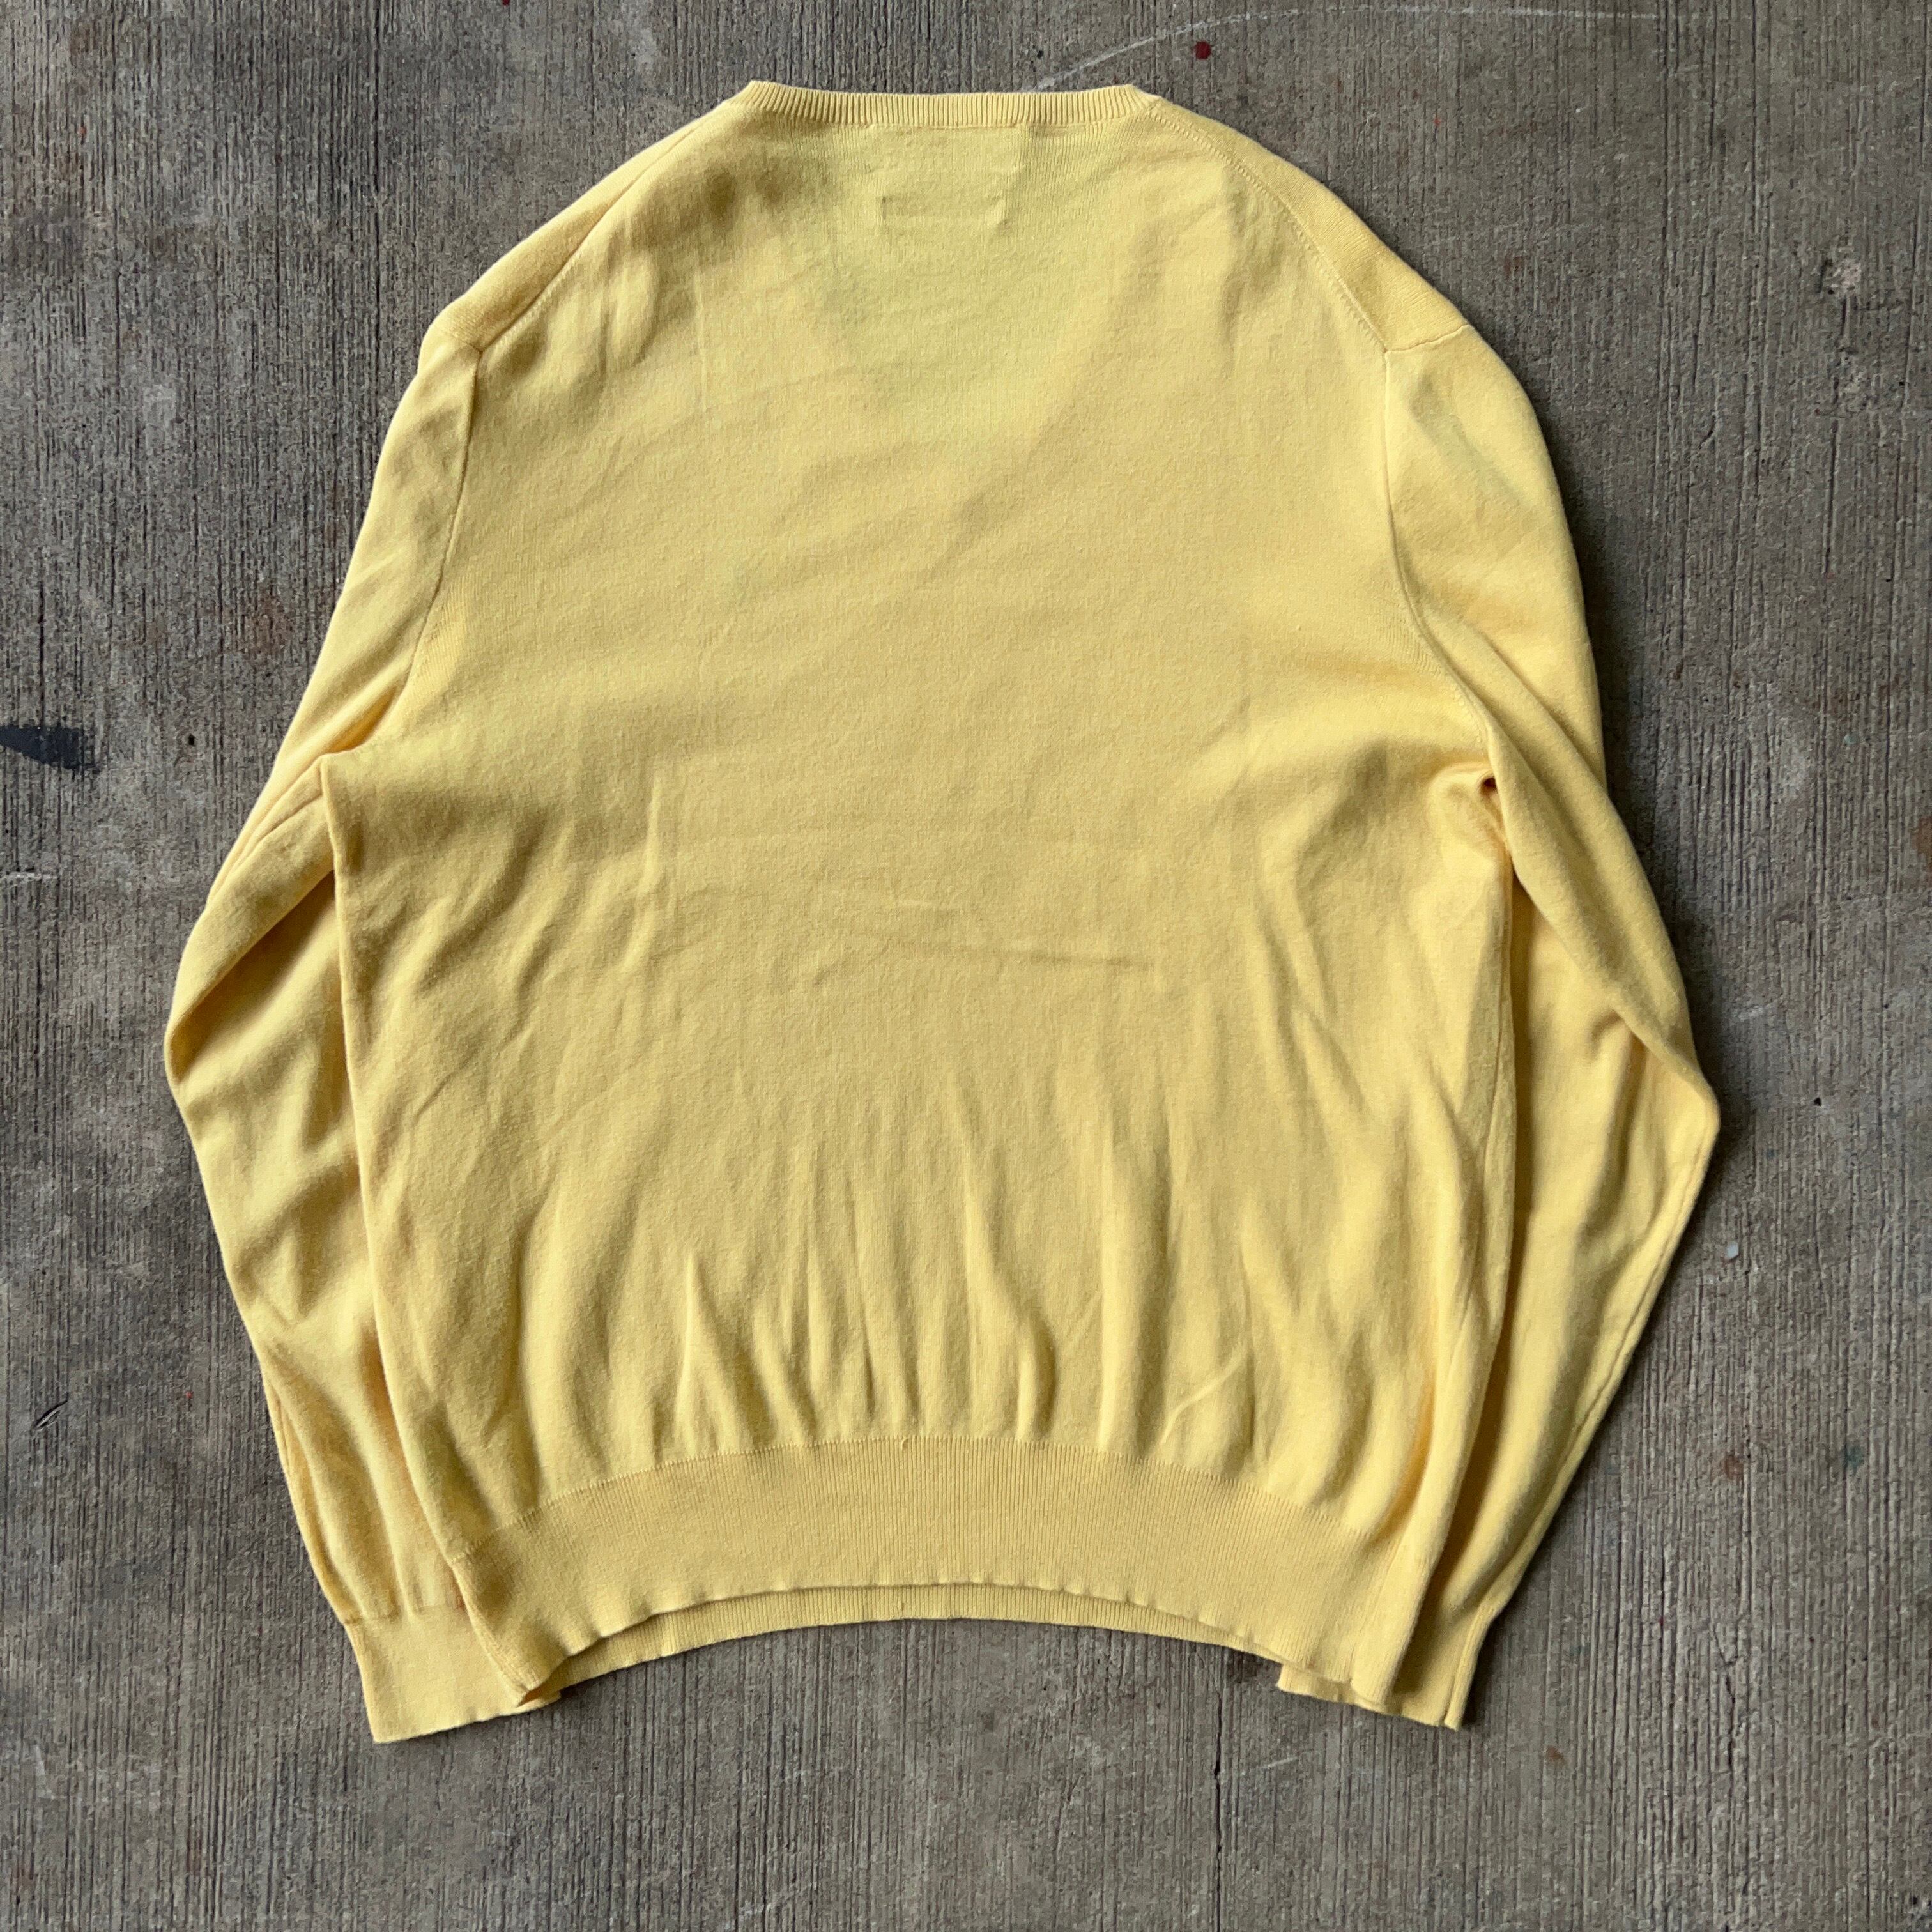 Polo by Ralph Lauren” V-neck PIMA COTTON Knit Sweater SIZE L ポロ 